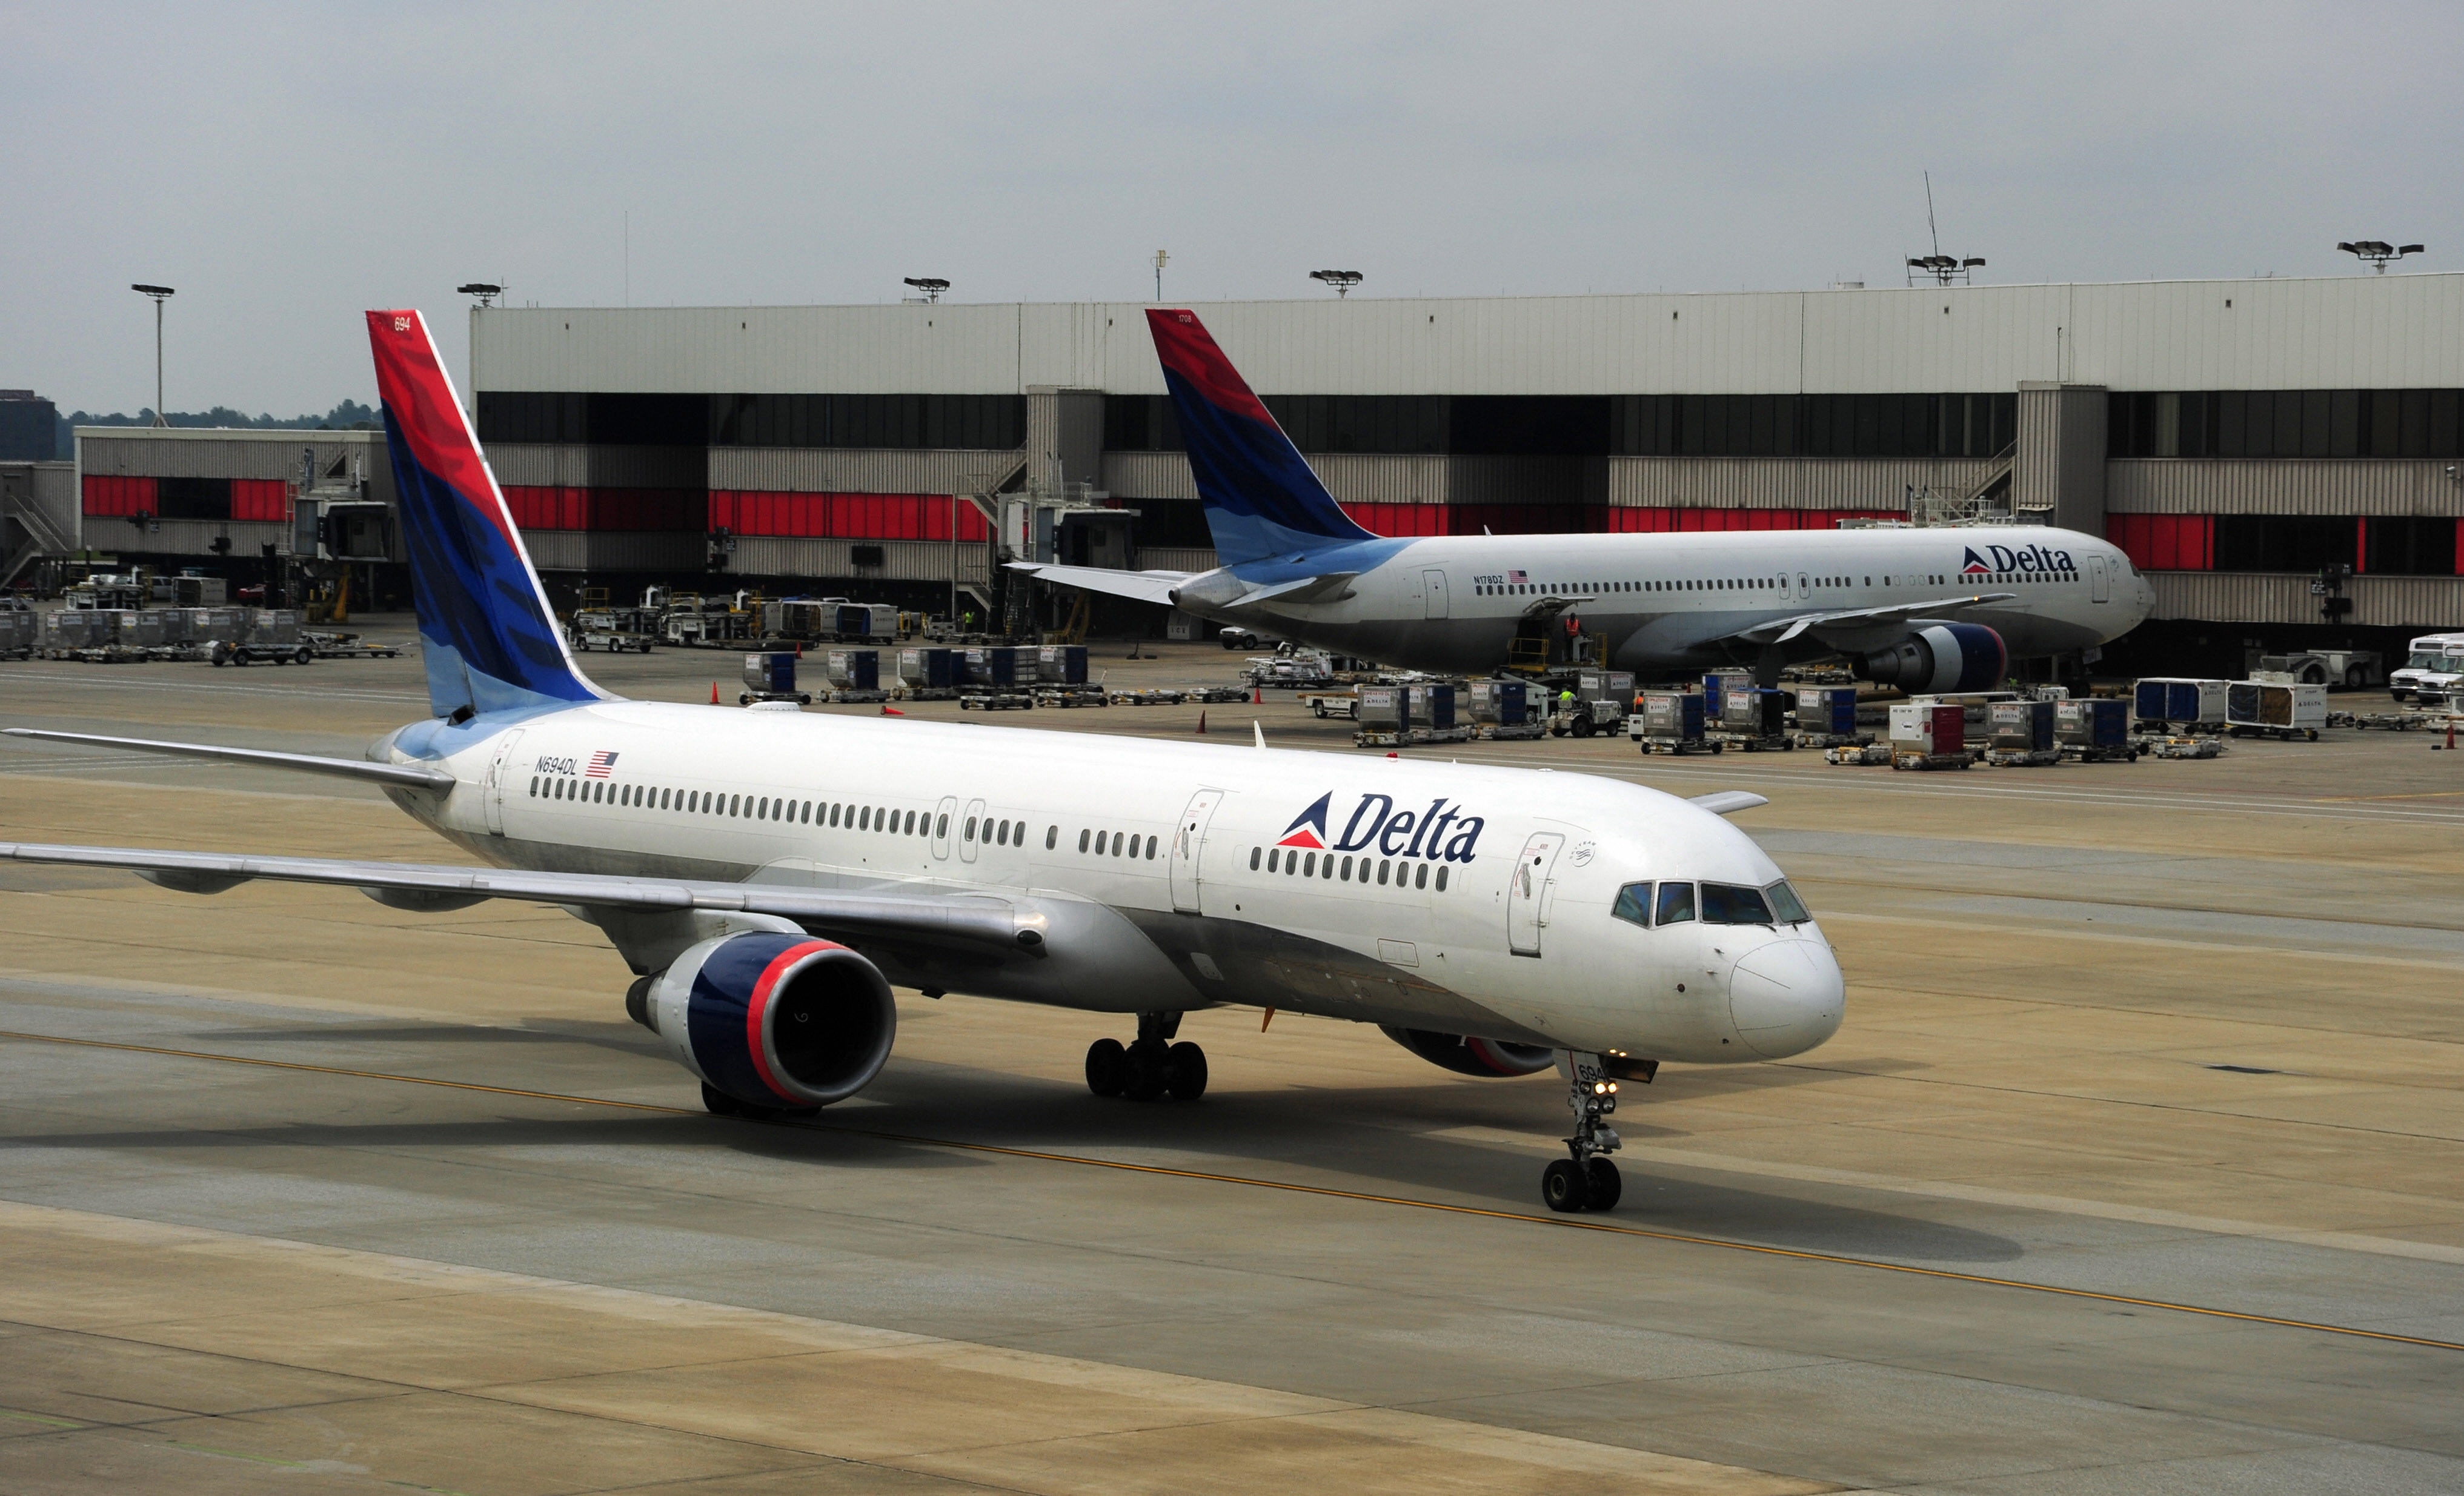 Delta Air Lines Flight Cut Short After Panel Behind Engine Falls Off During Takeoff